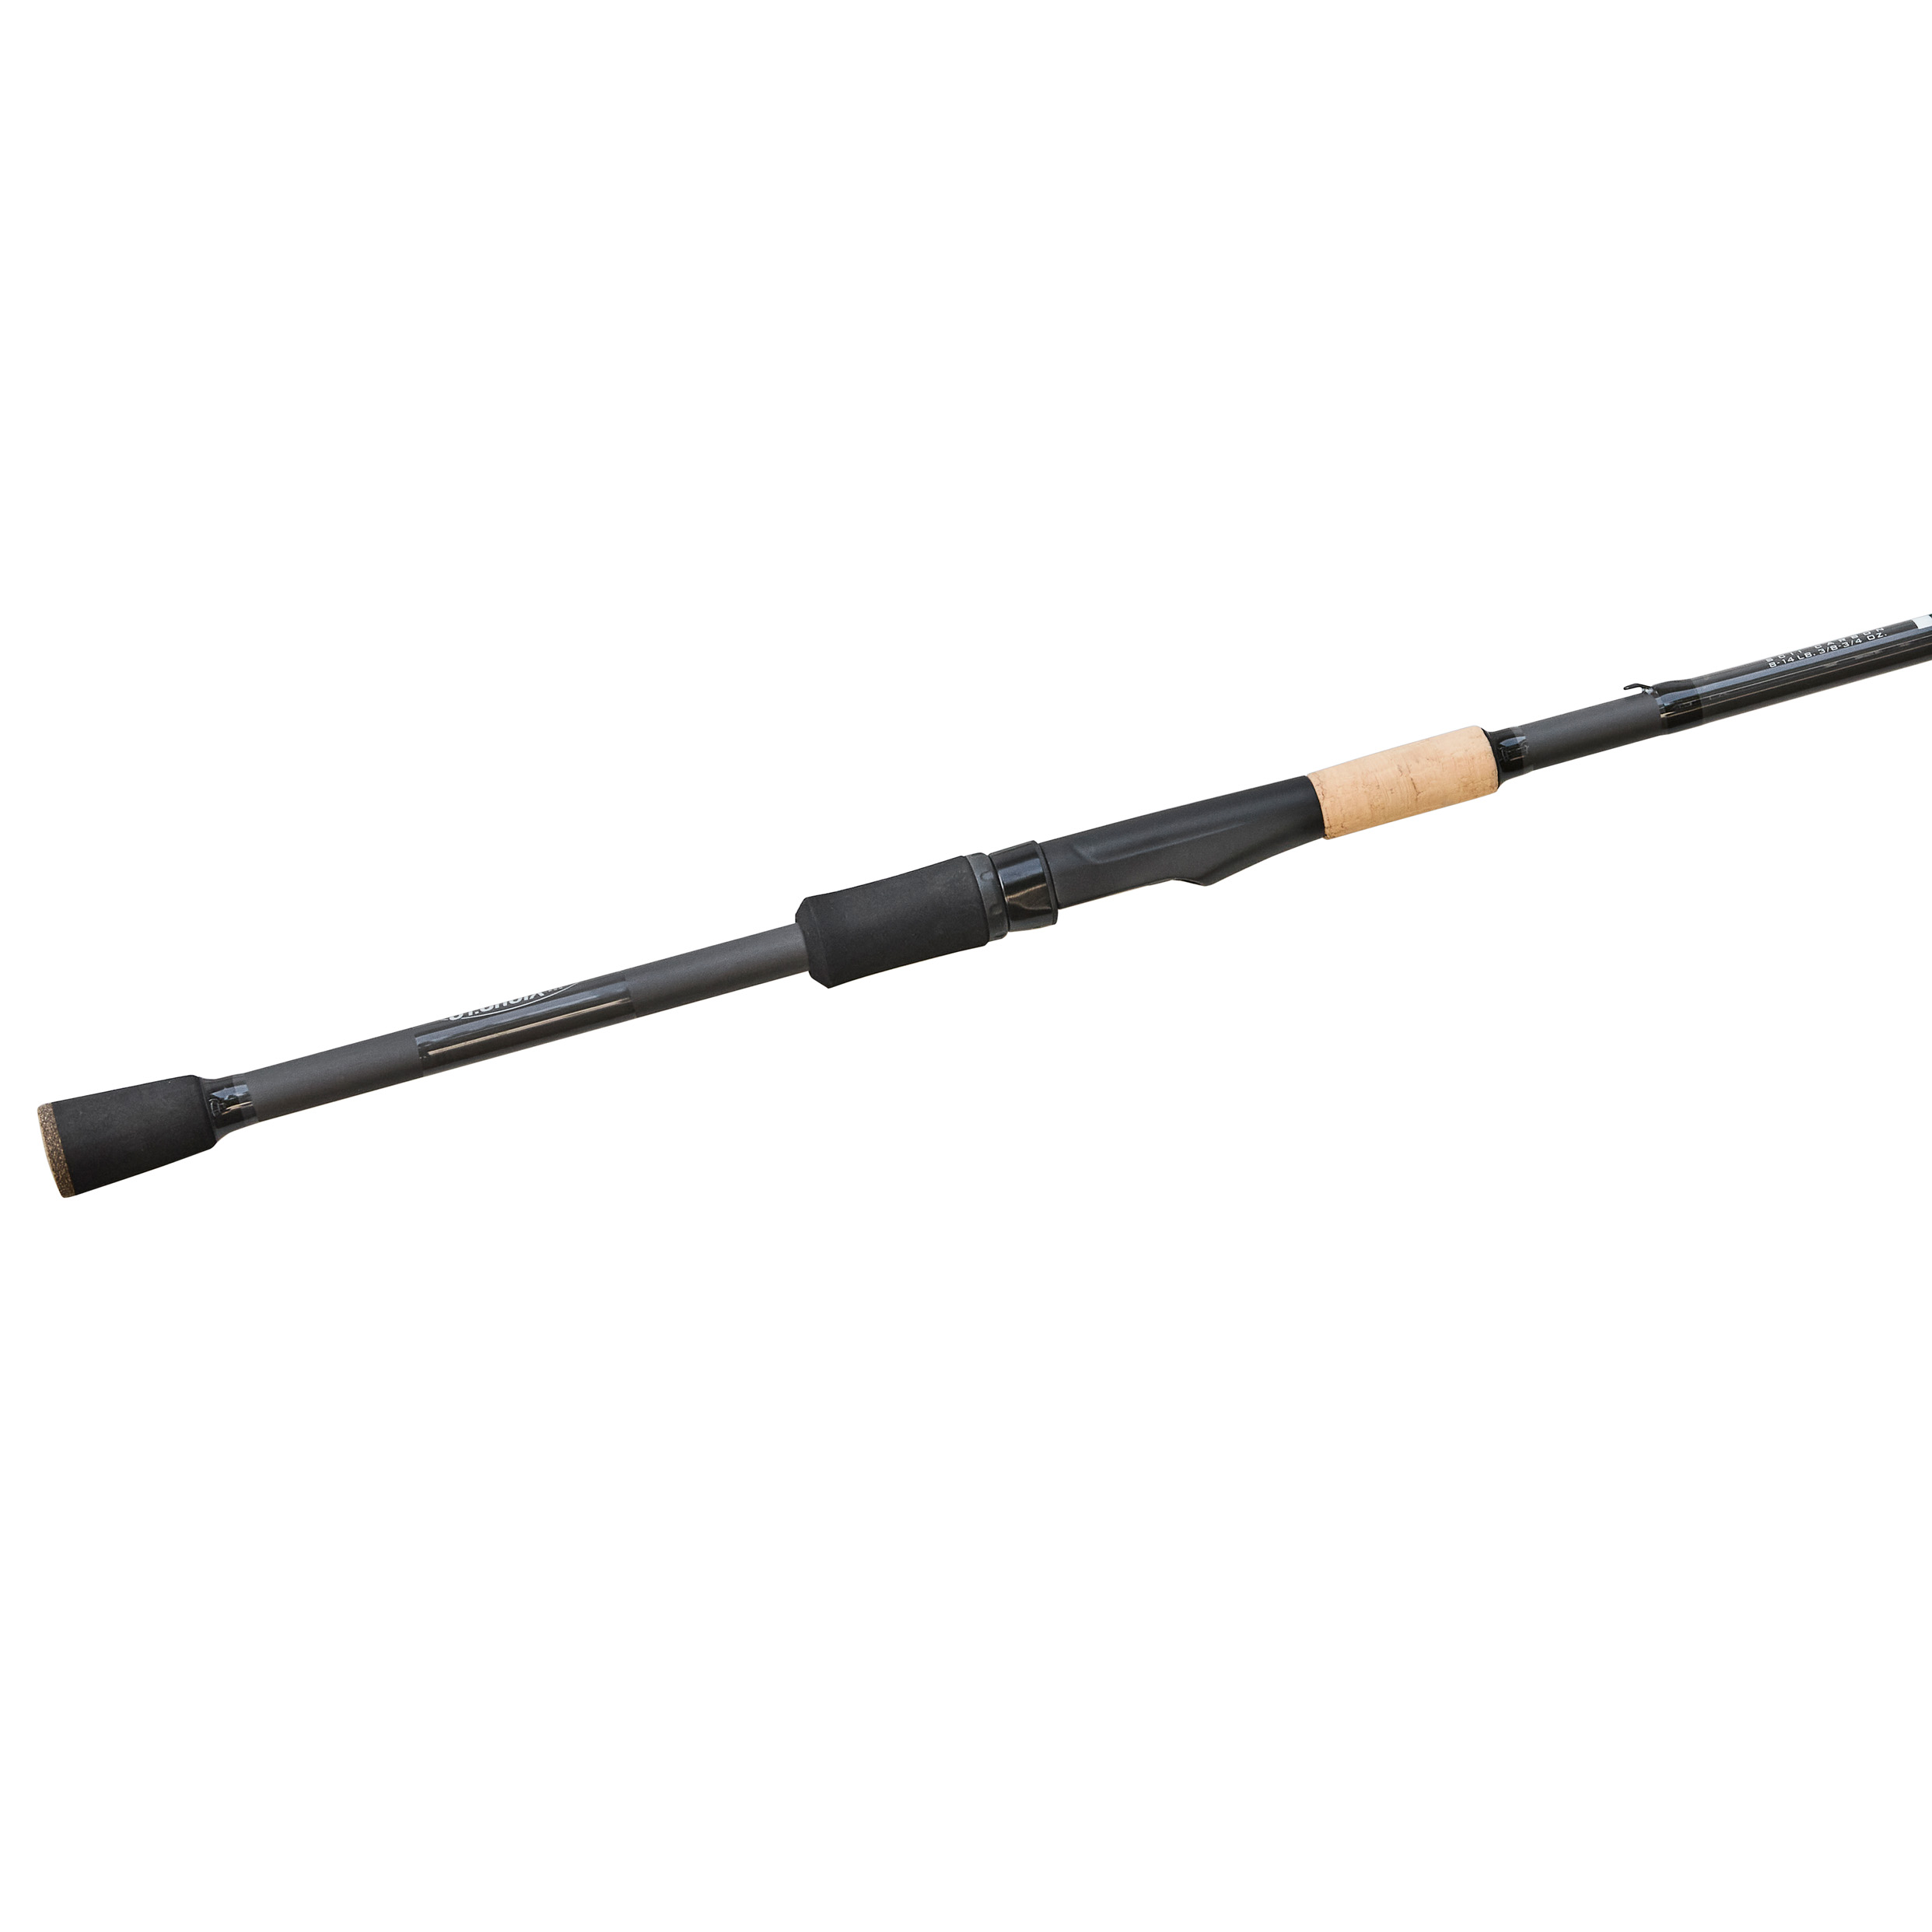 St Croix Bass X Spinning Rod BAS71MF 5.31-17.7g from